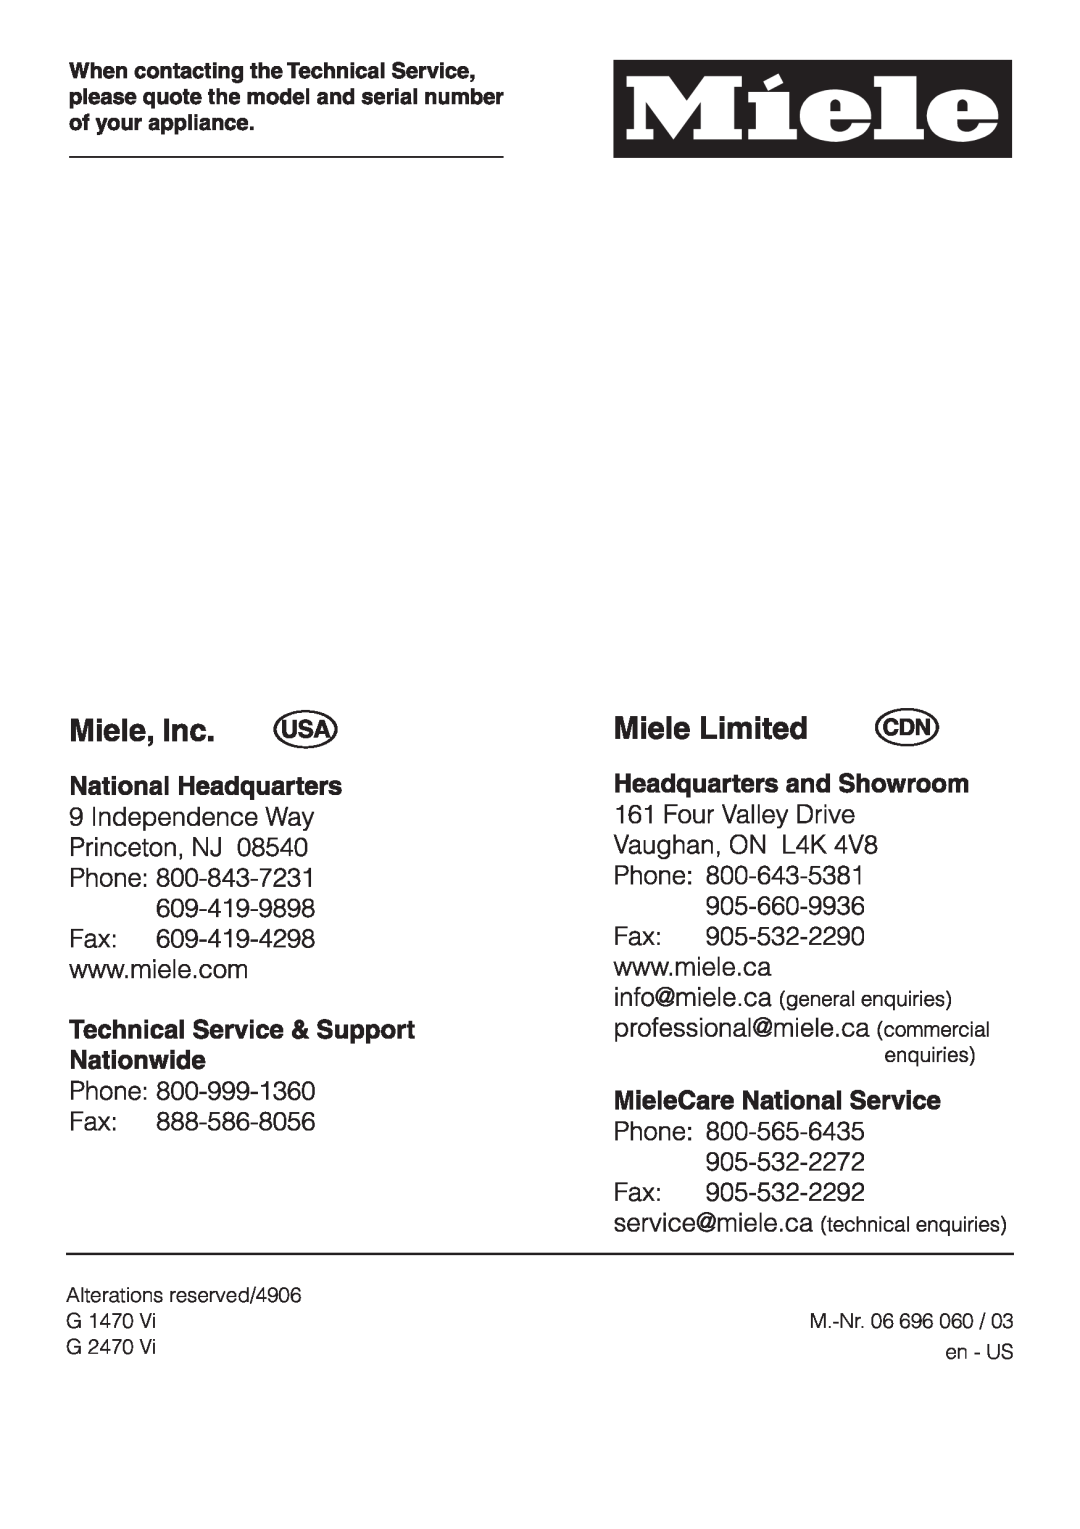 Miele G 1470, G 2470 manual Alterations reserved/4906, en - US, M.-Nr.06 